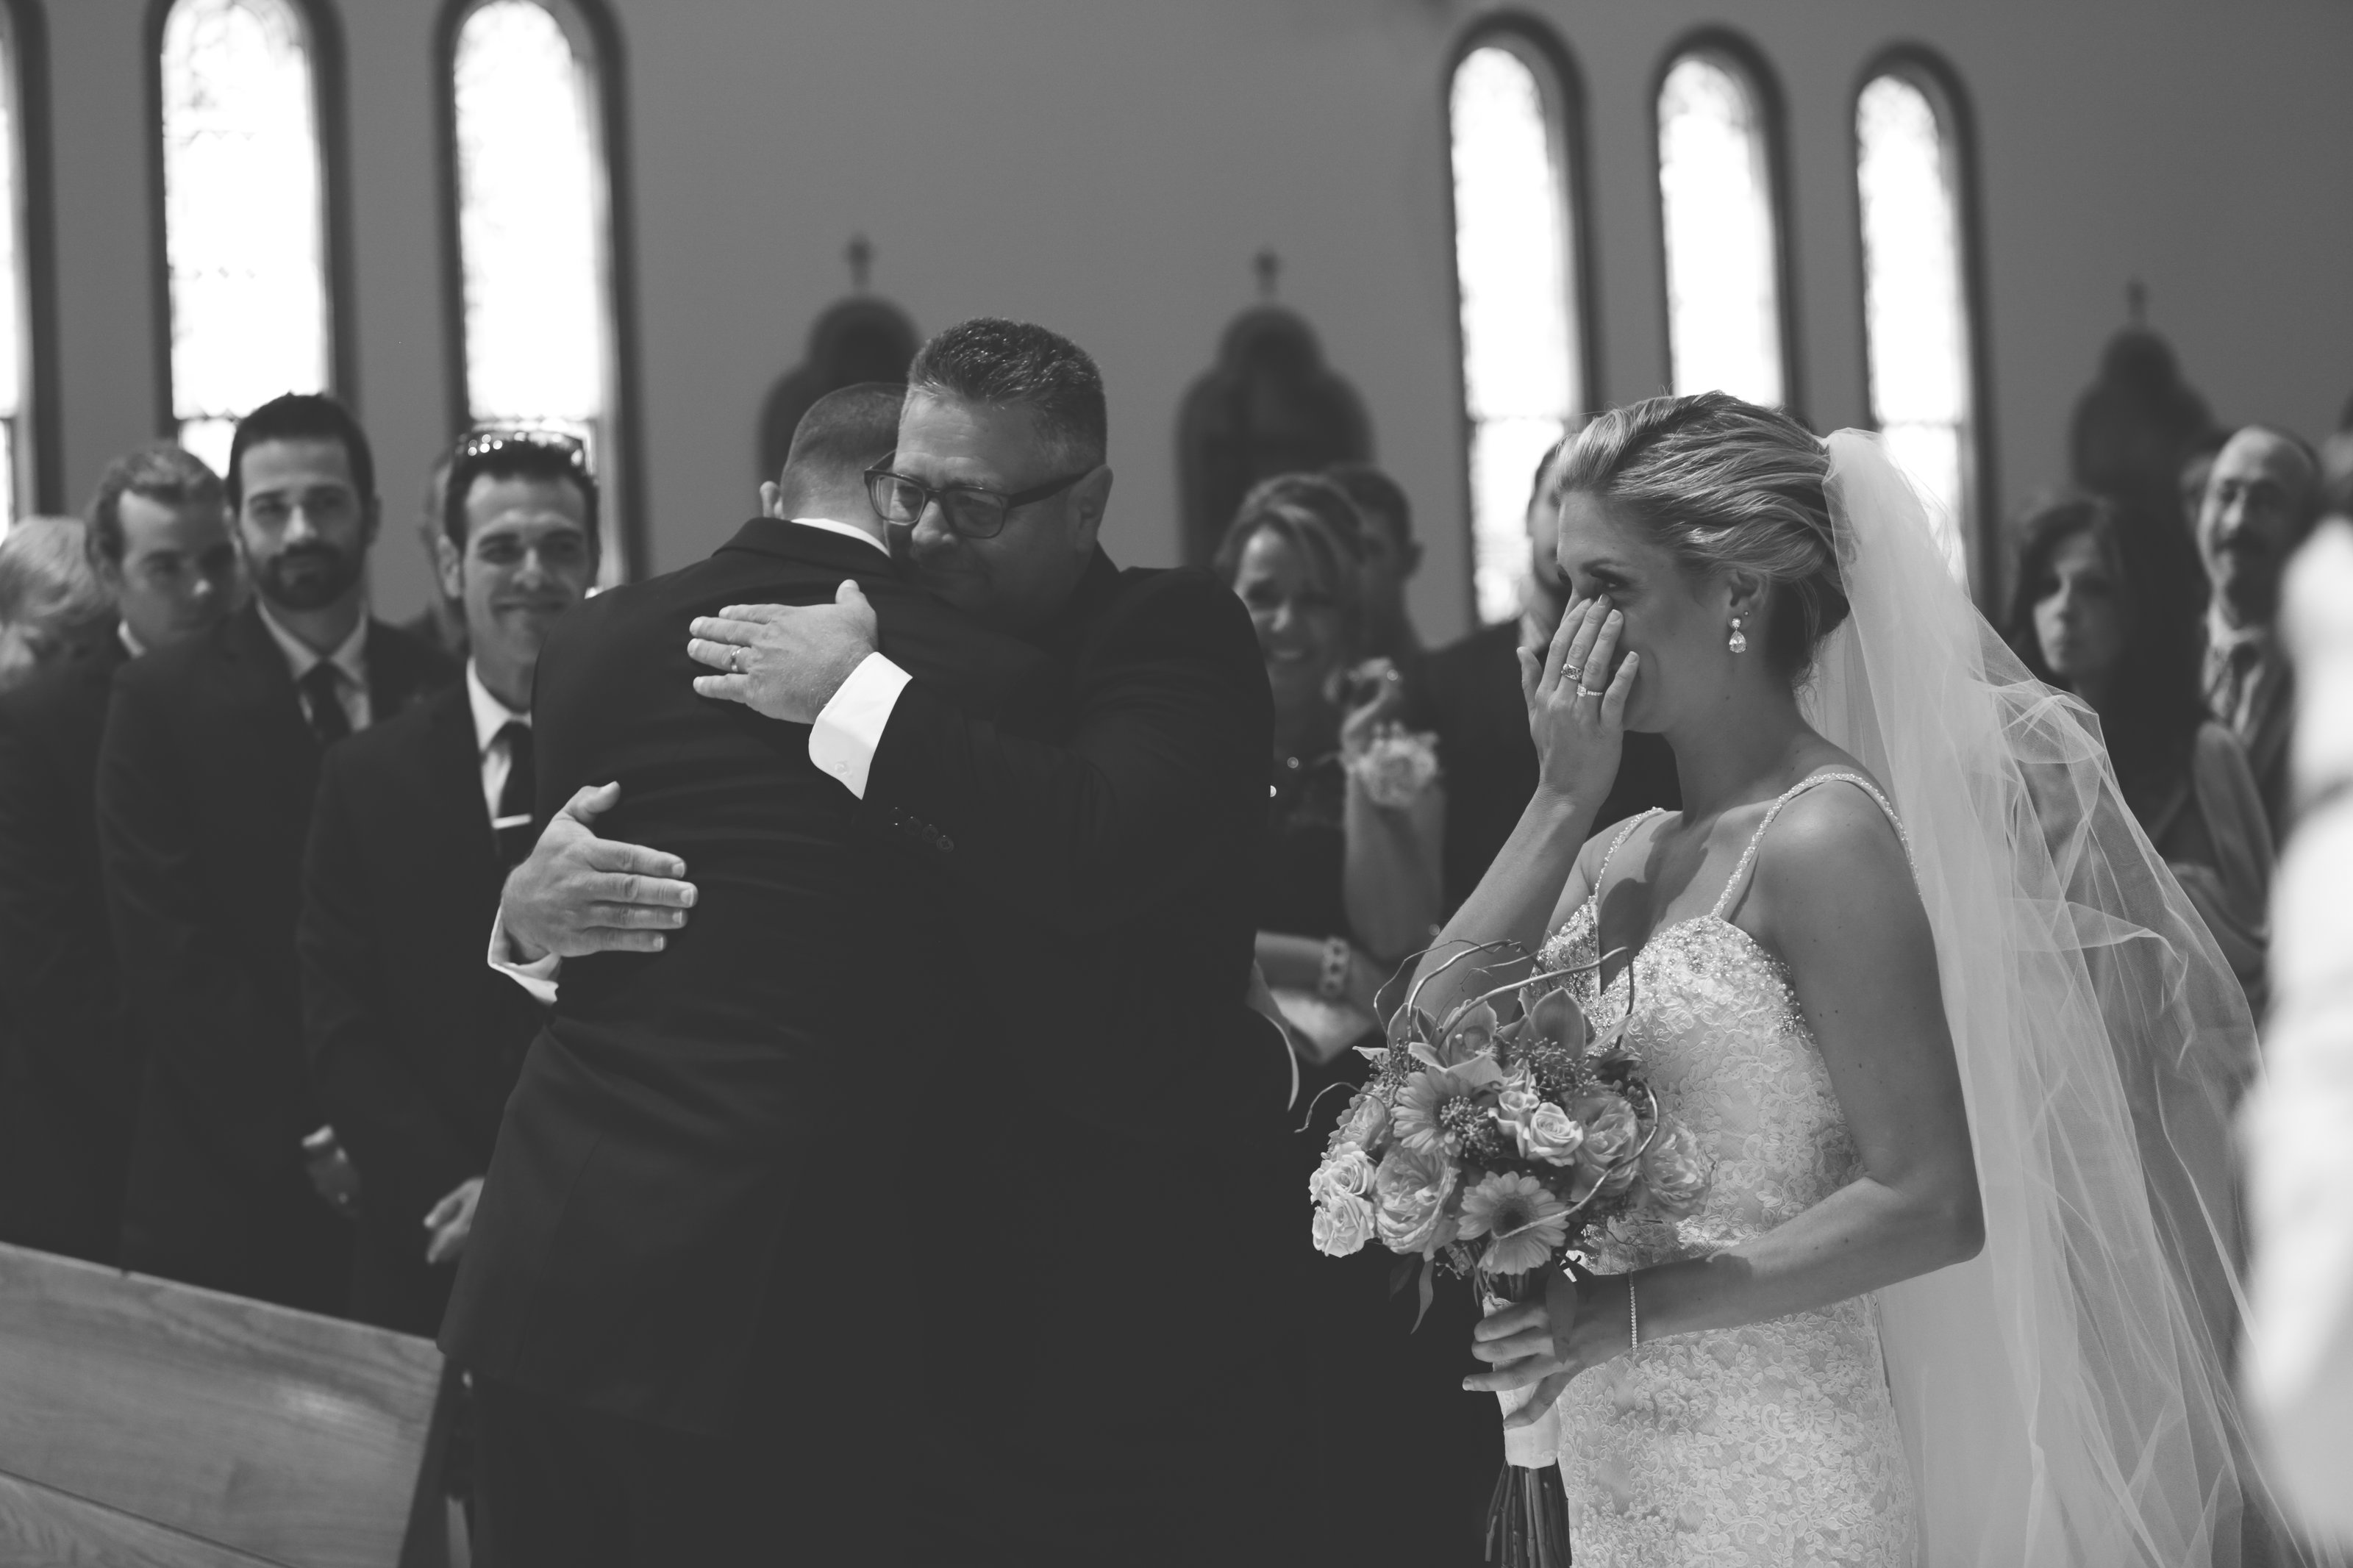 Videographers capture the emotional moments of a wedding day for you to relive later.